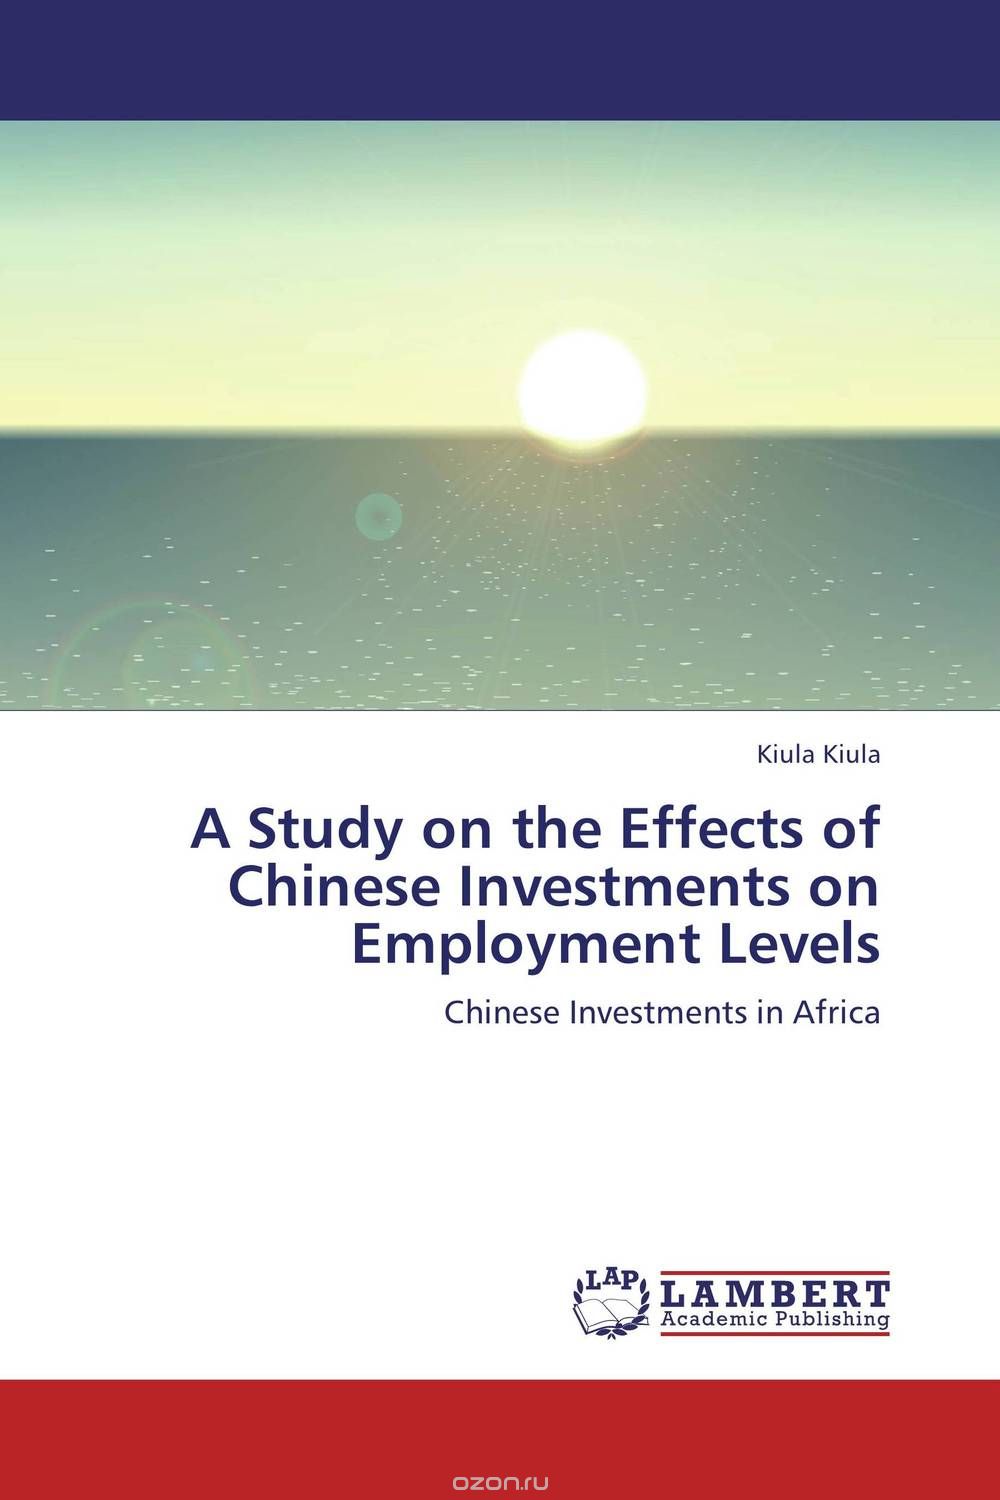 Скачать книгу "A Study on the Effects of Chinese Investments on Employment Levels"